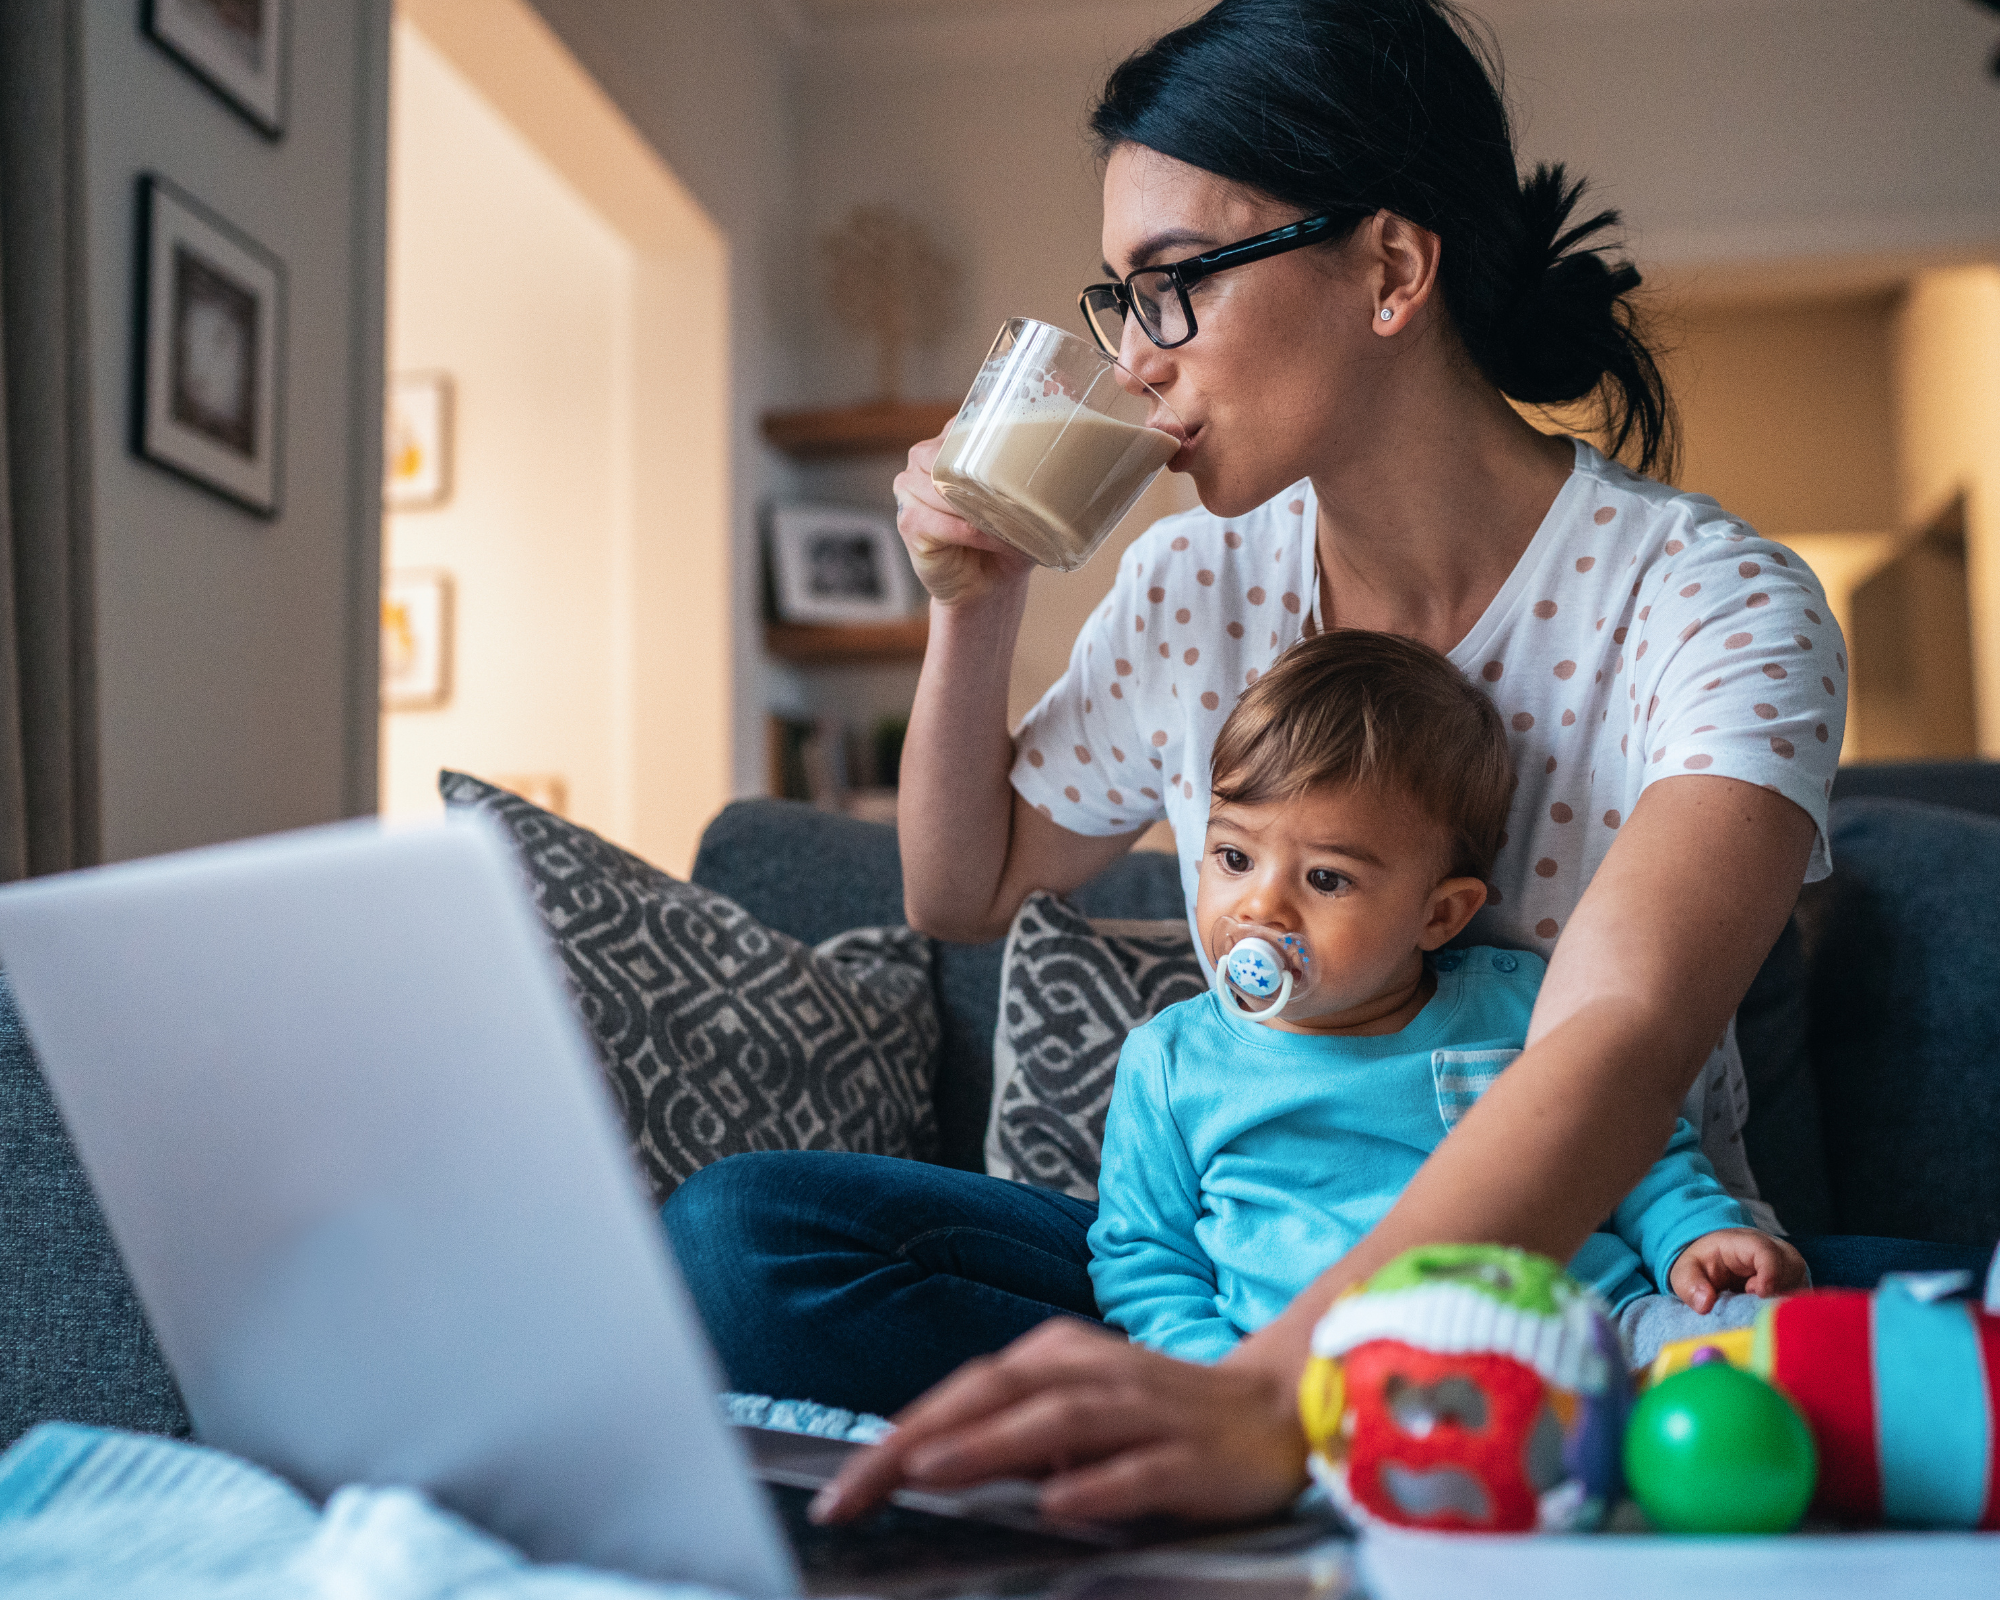 Woman sitting on the floor looking at her laptop and drinking coffee with a child in her lap